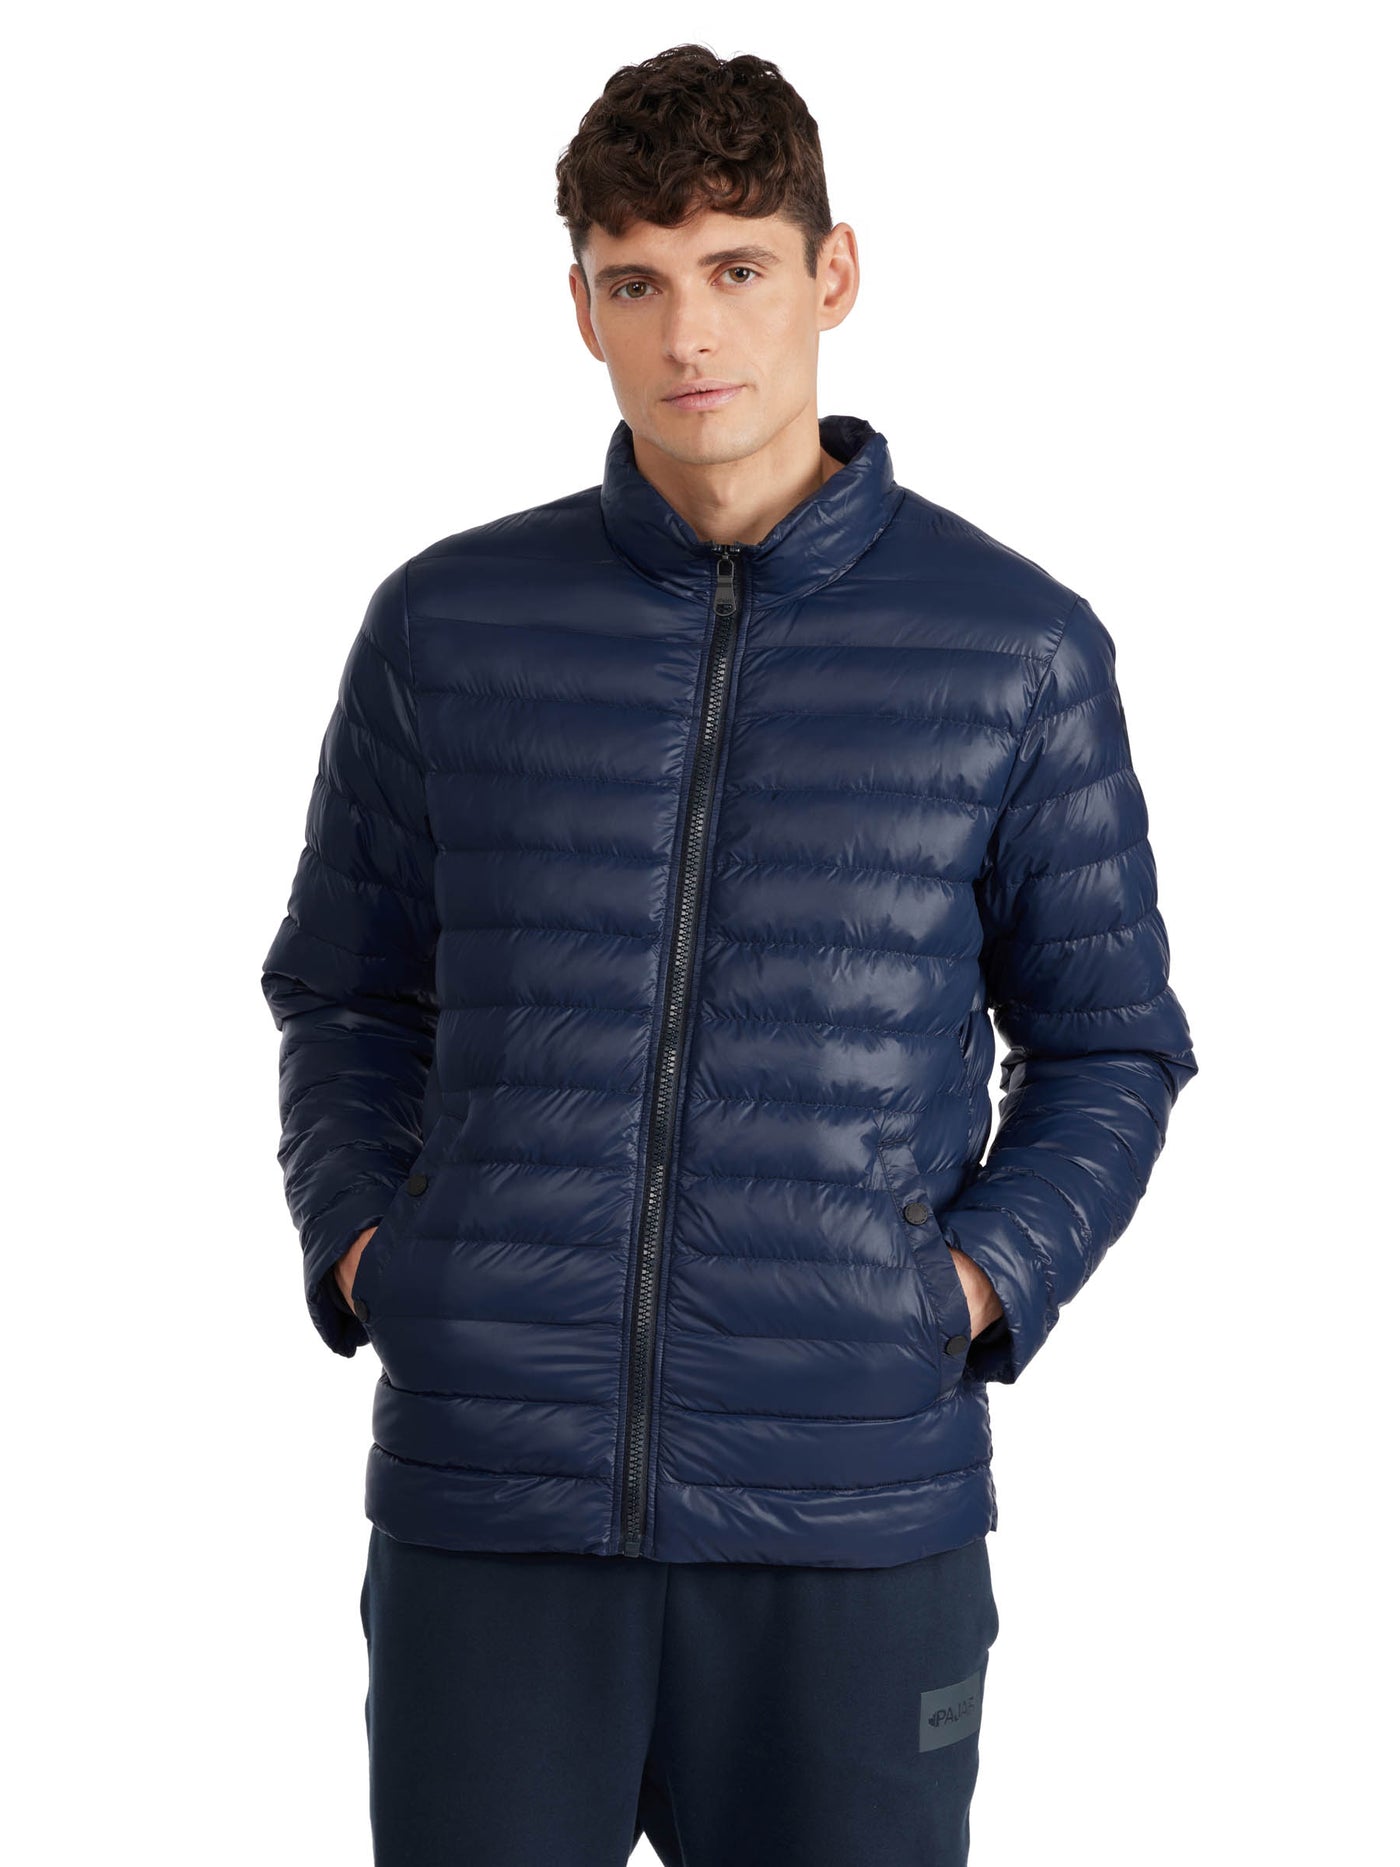 Altair Men's 3-in-1 Shell and Puffer Jacket